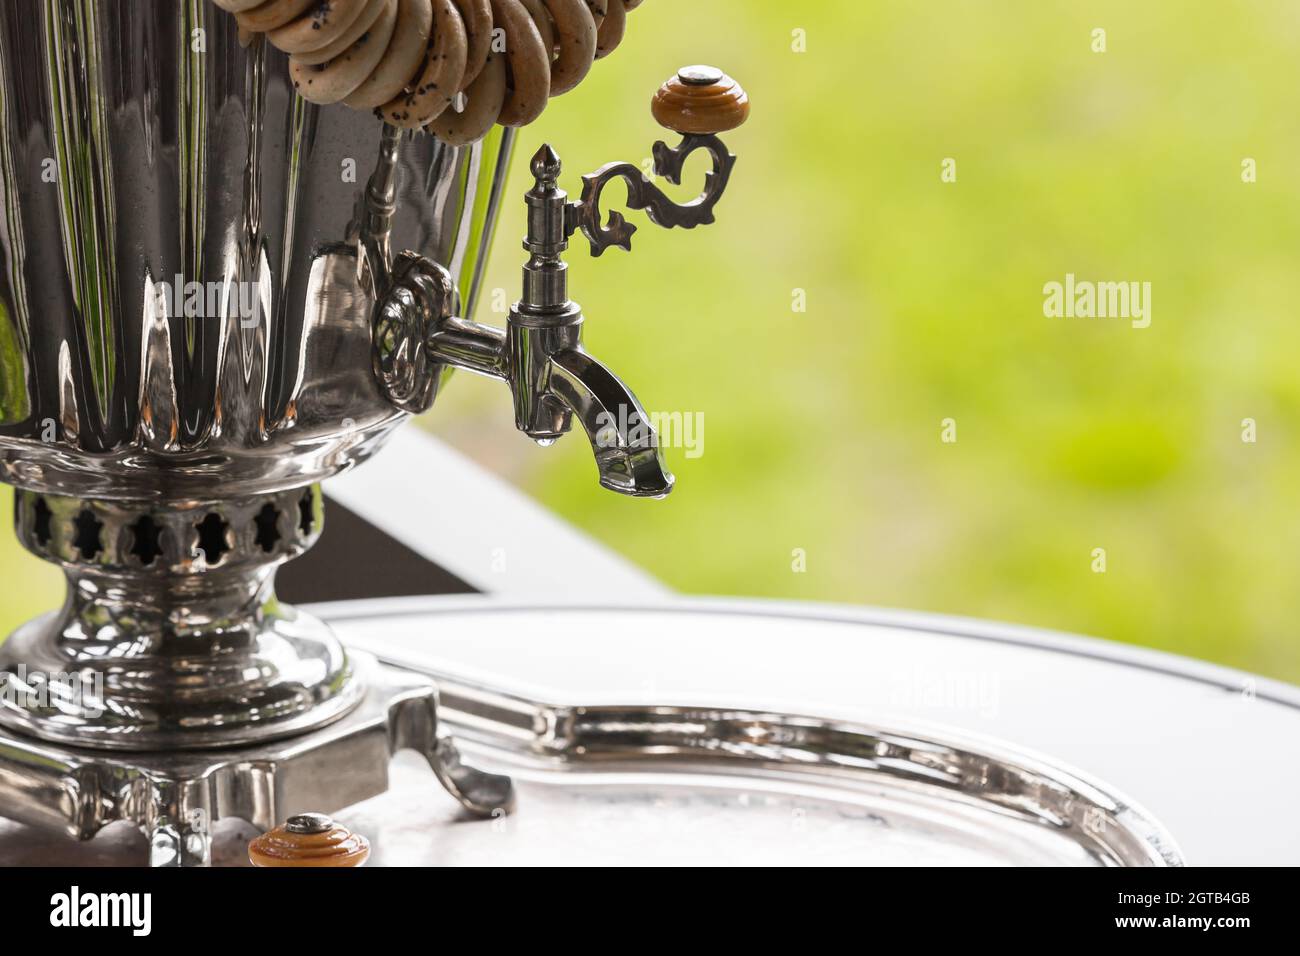 Faucet of traditional Russian Samovar, a metal container used to heat and boil water for tea ceremony Stock Photo